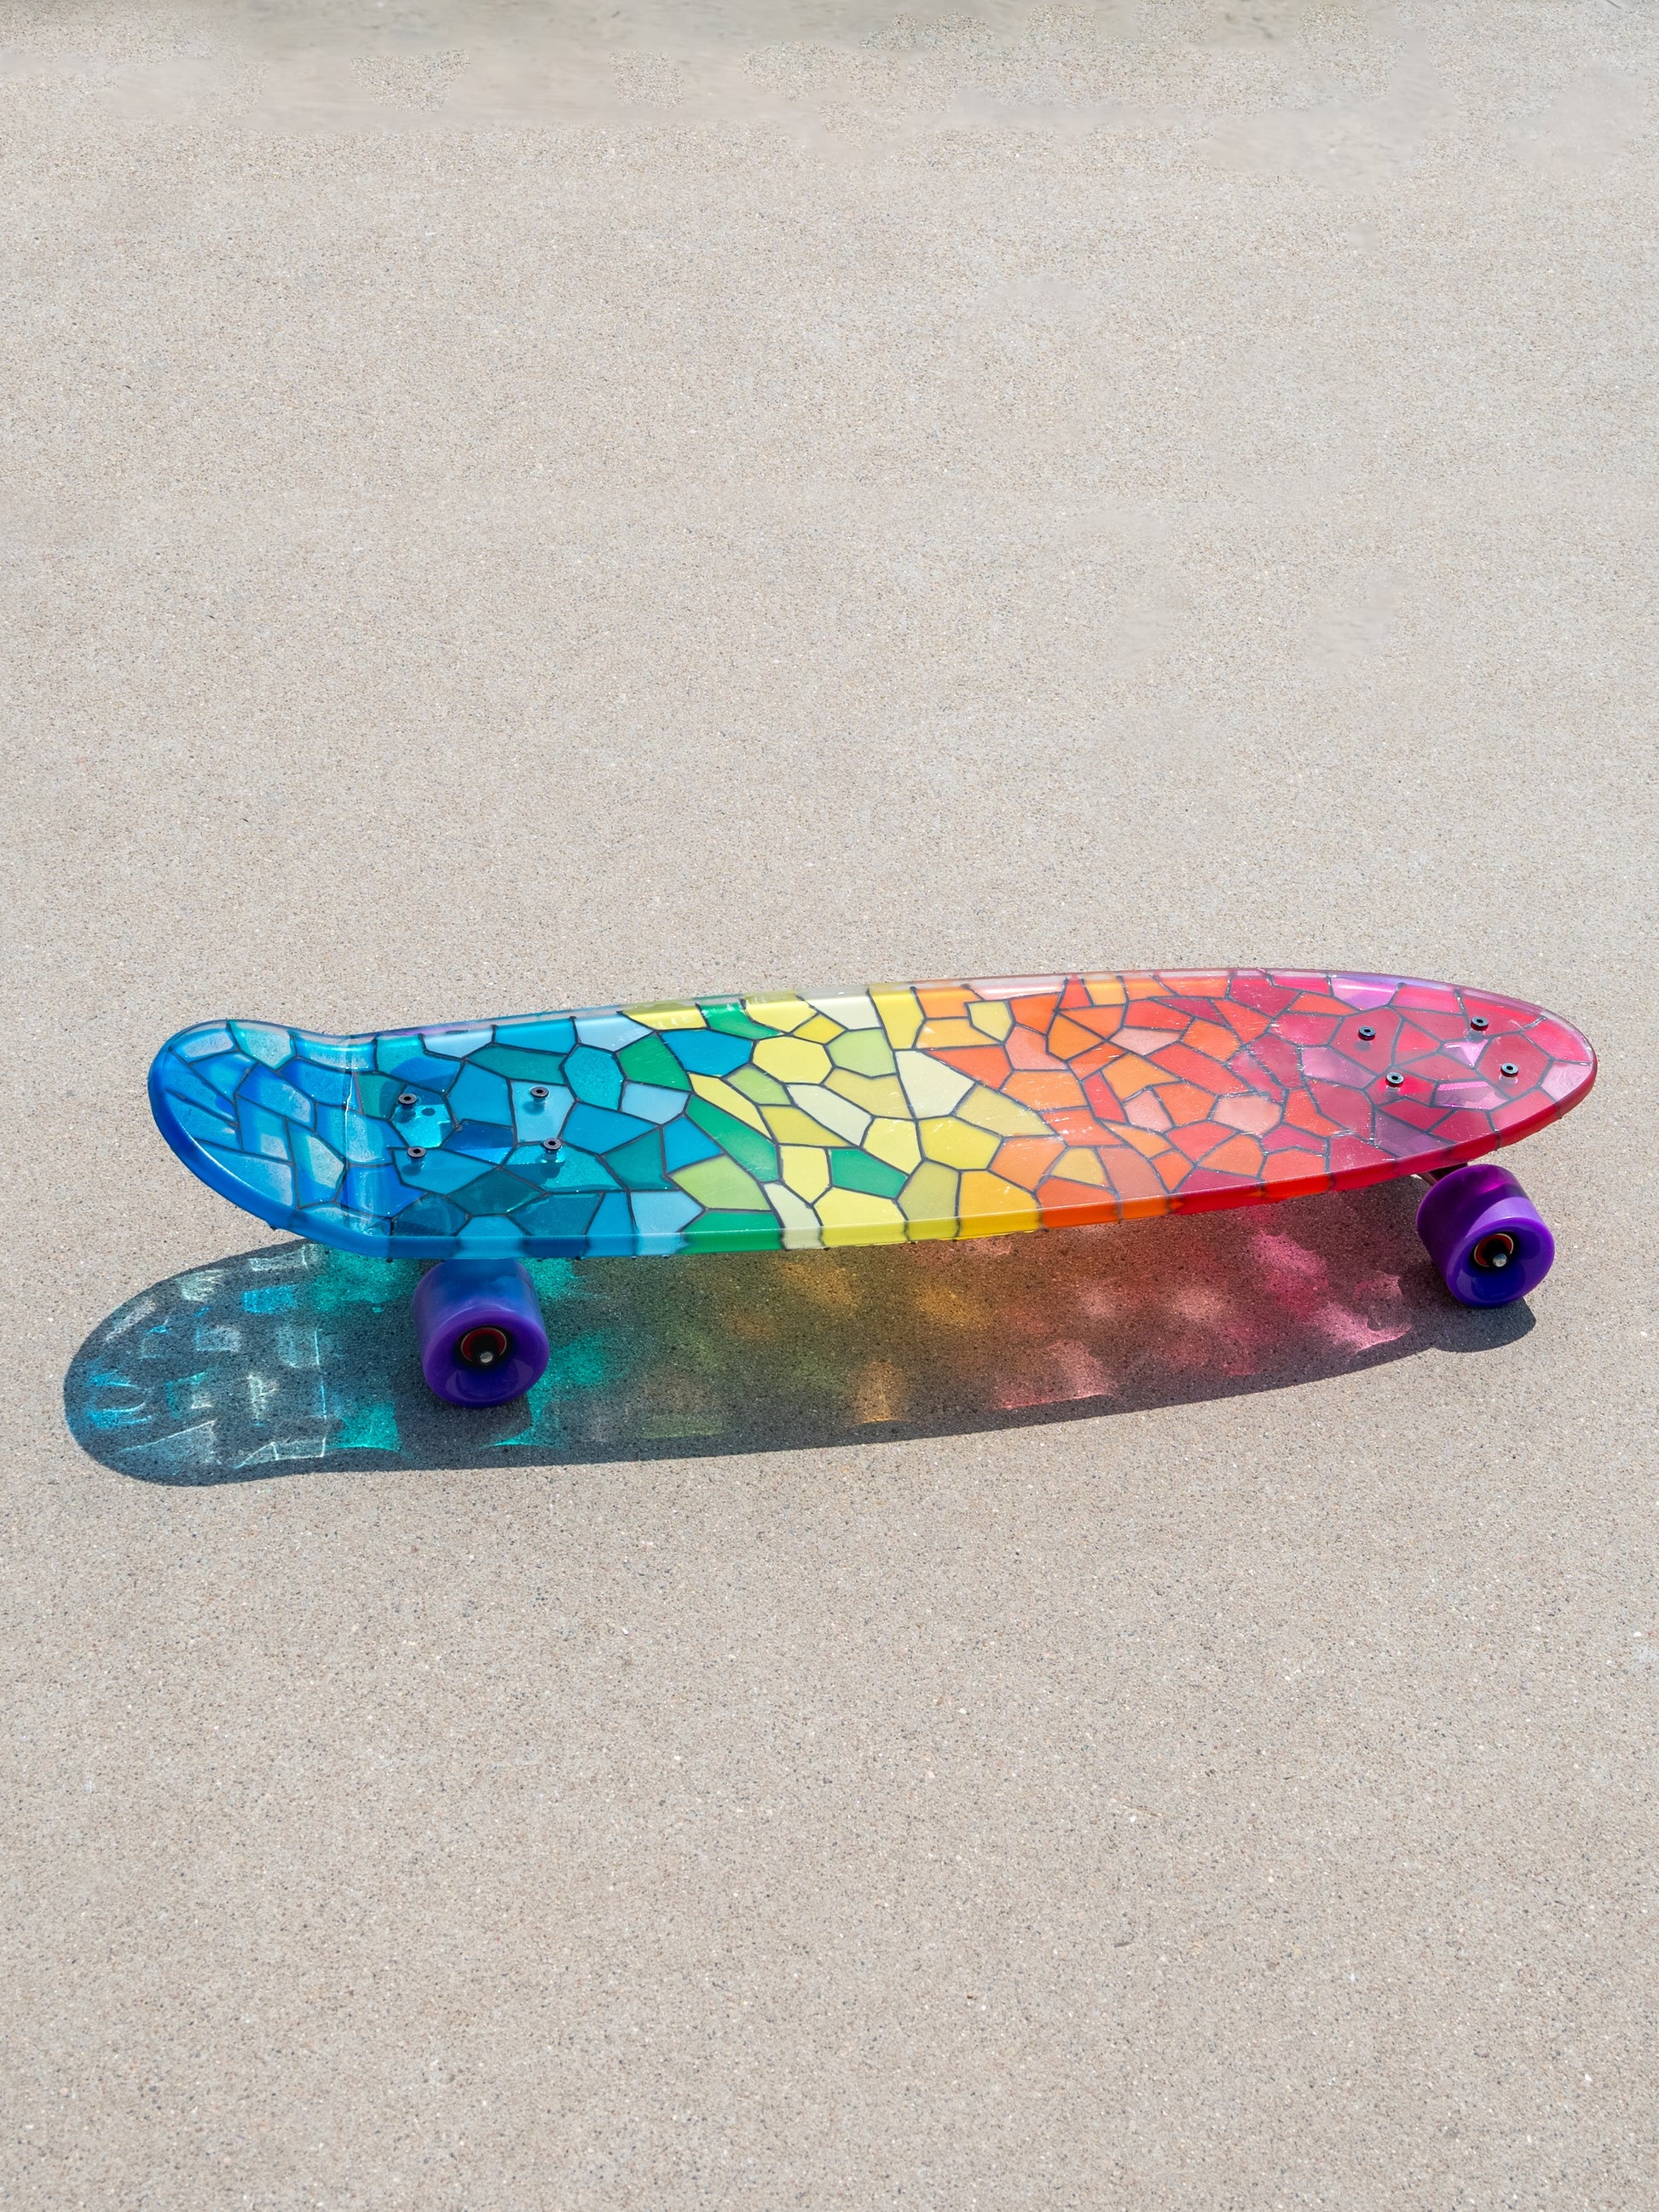 See-through rainbow stained glass skateboard with colorful shadow.